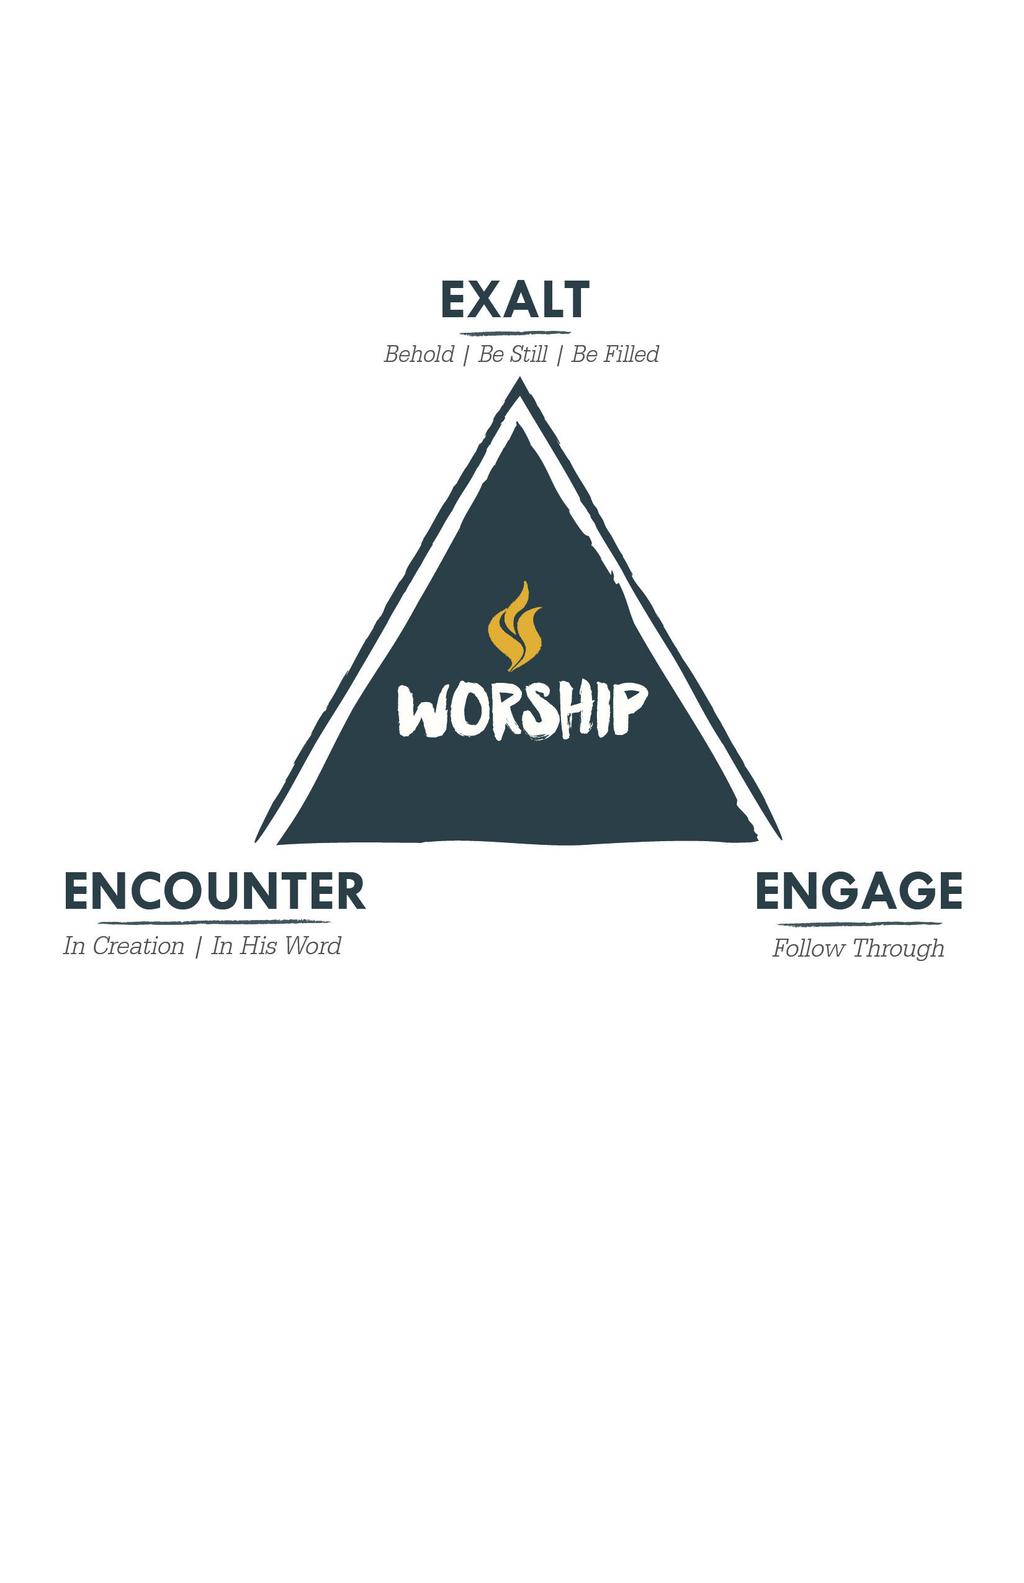 SERMON NOTES ADDITIONAL NOTES 20 Reading plan MONDAY TUESDAY WEDNESDAY THURSDAY FRIDAY Psalm 57:1-11 - Be exalted, O God!